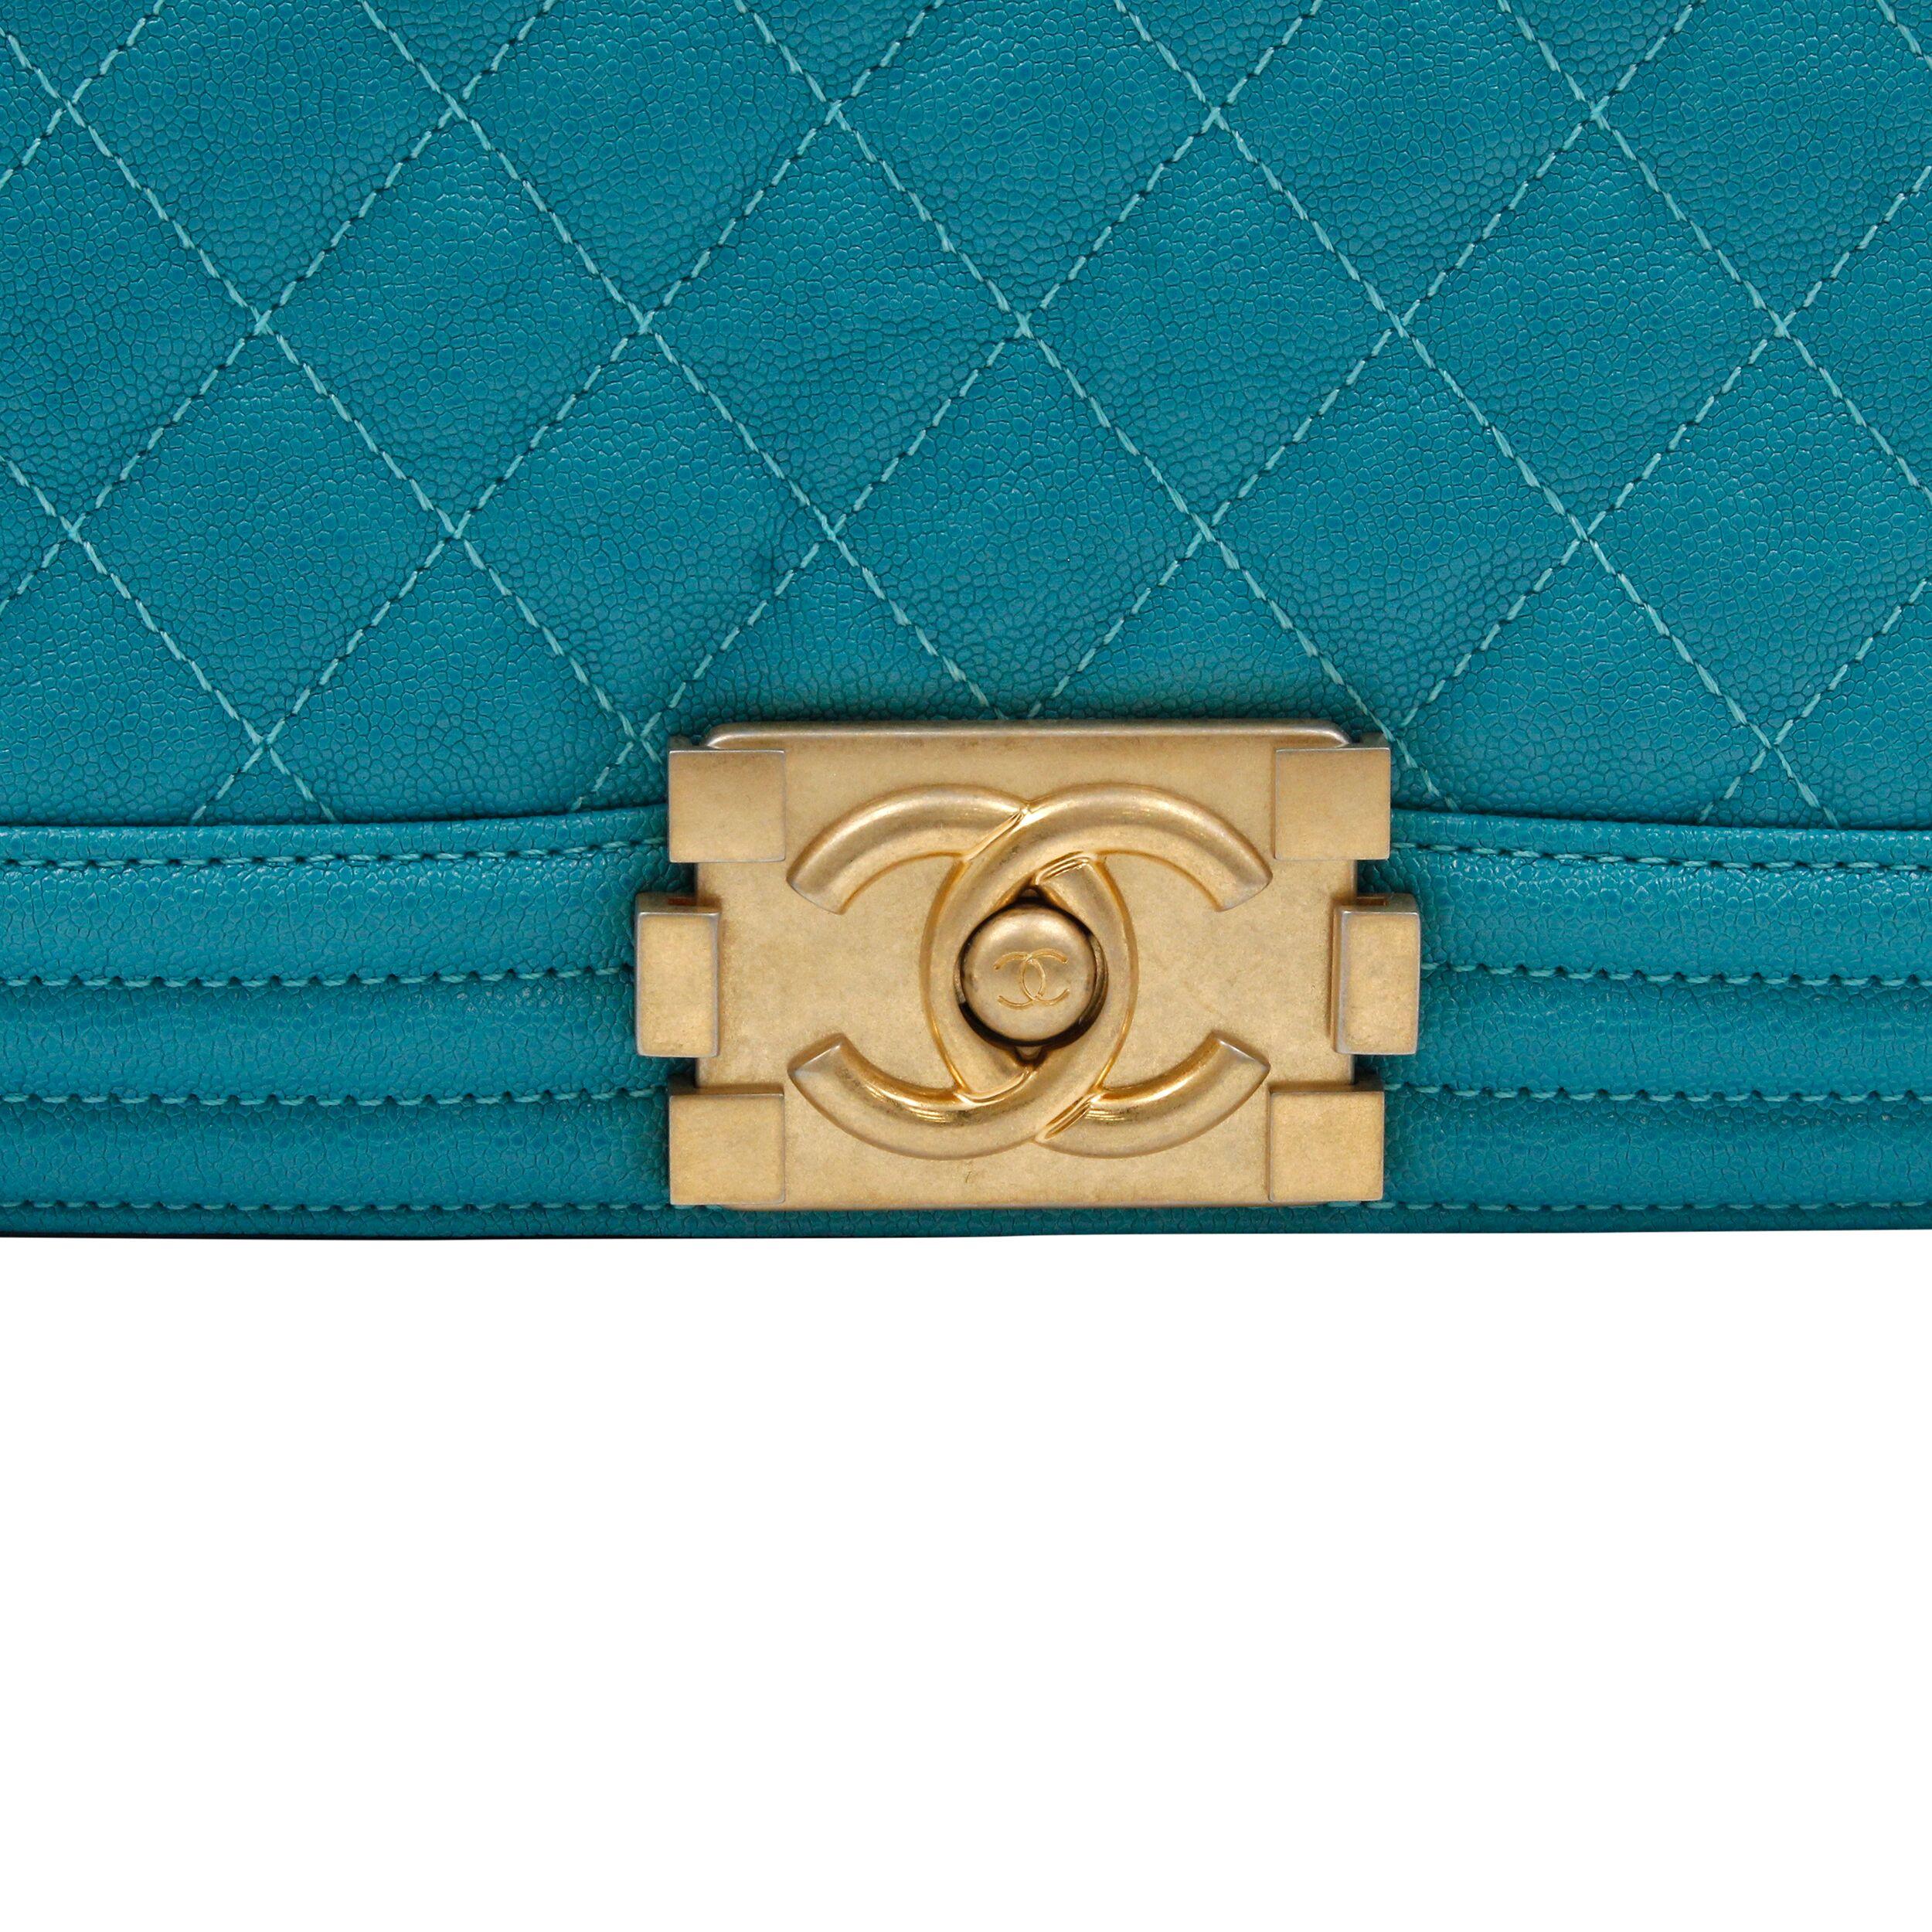 Chanel Medium Teal Turquoise Quilted Caviar Calf Skin Gold Tone Boy Bag A67086 5